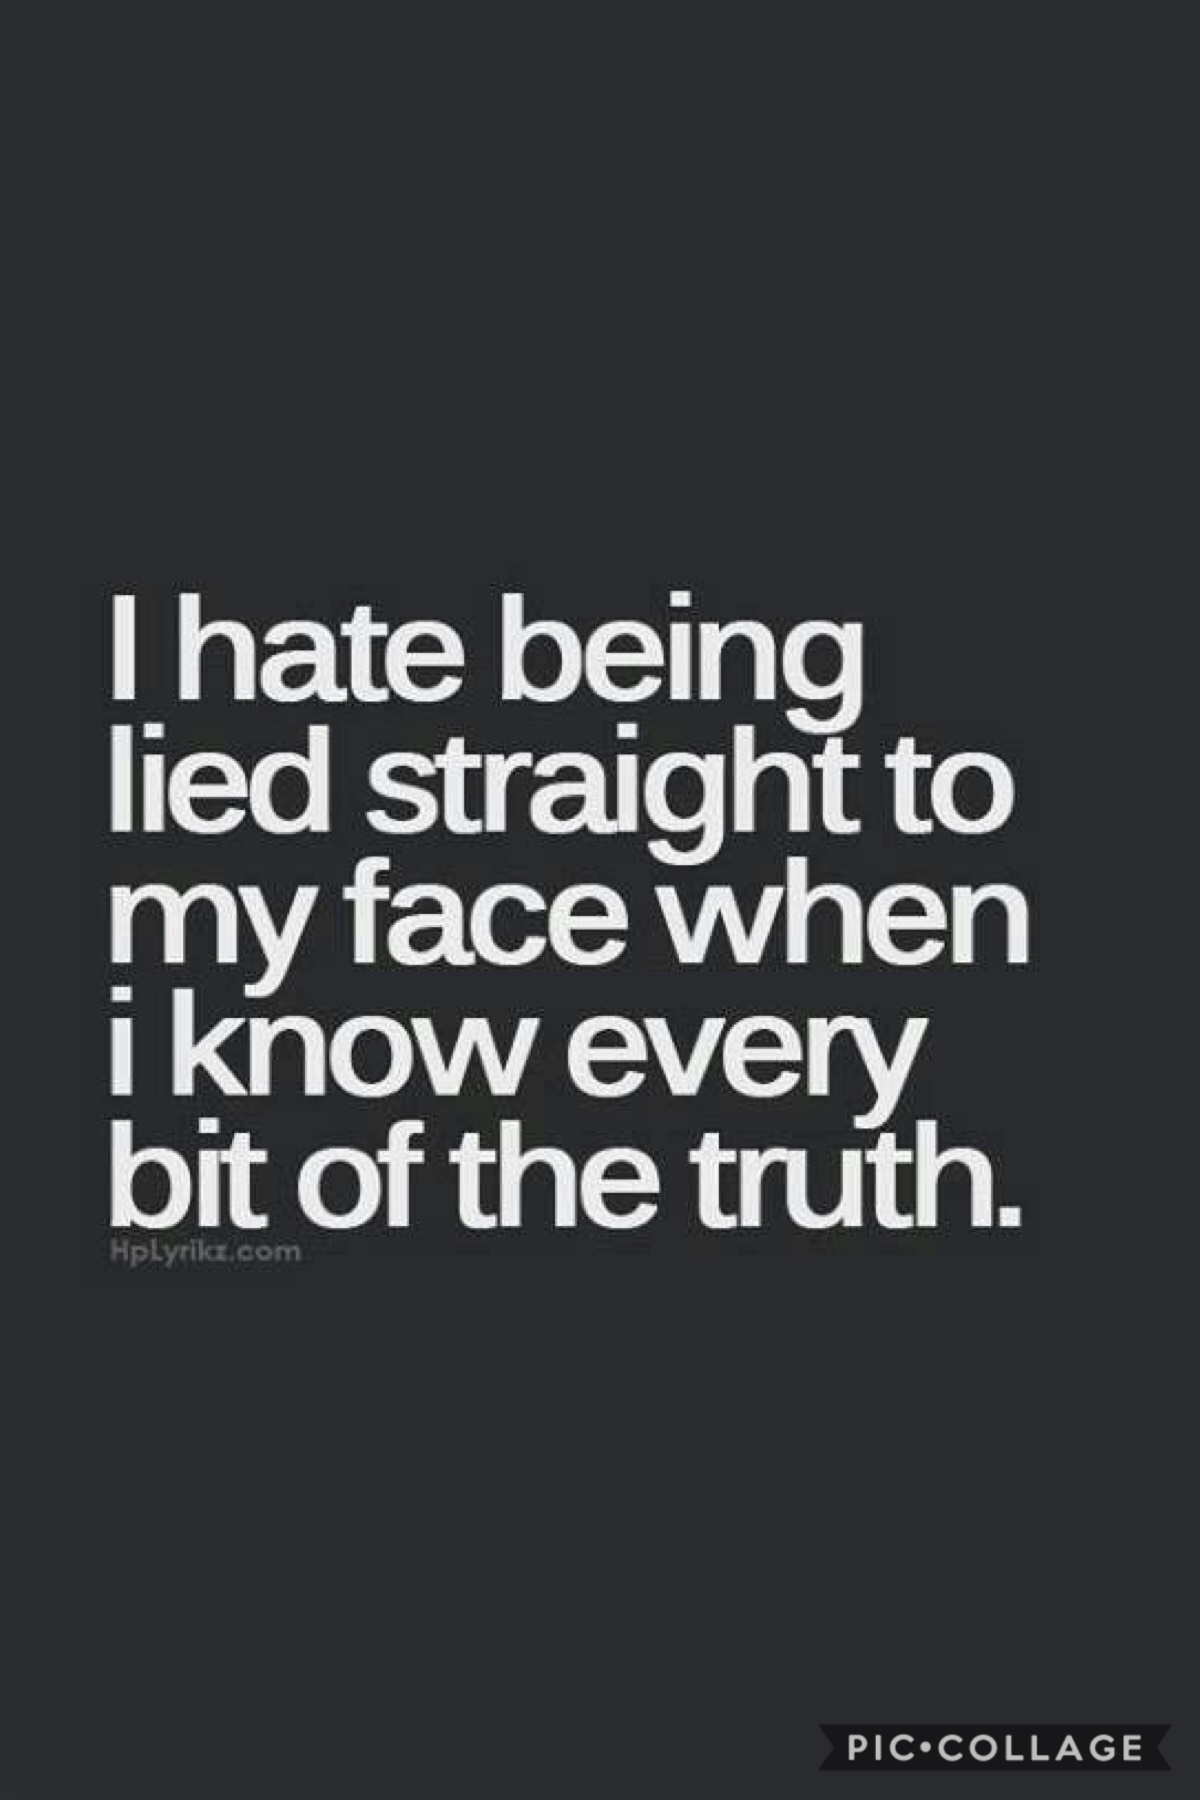 I found out a ‘friendship’ I have is made of lies. Yay.